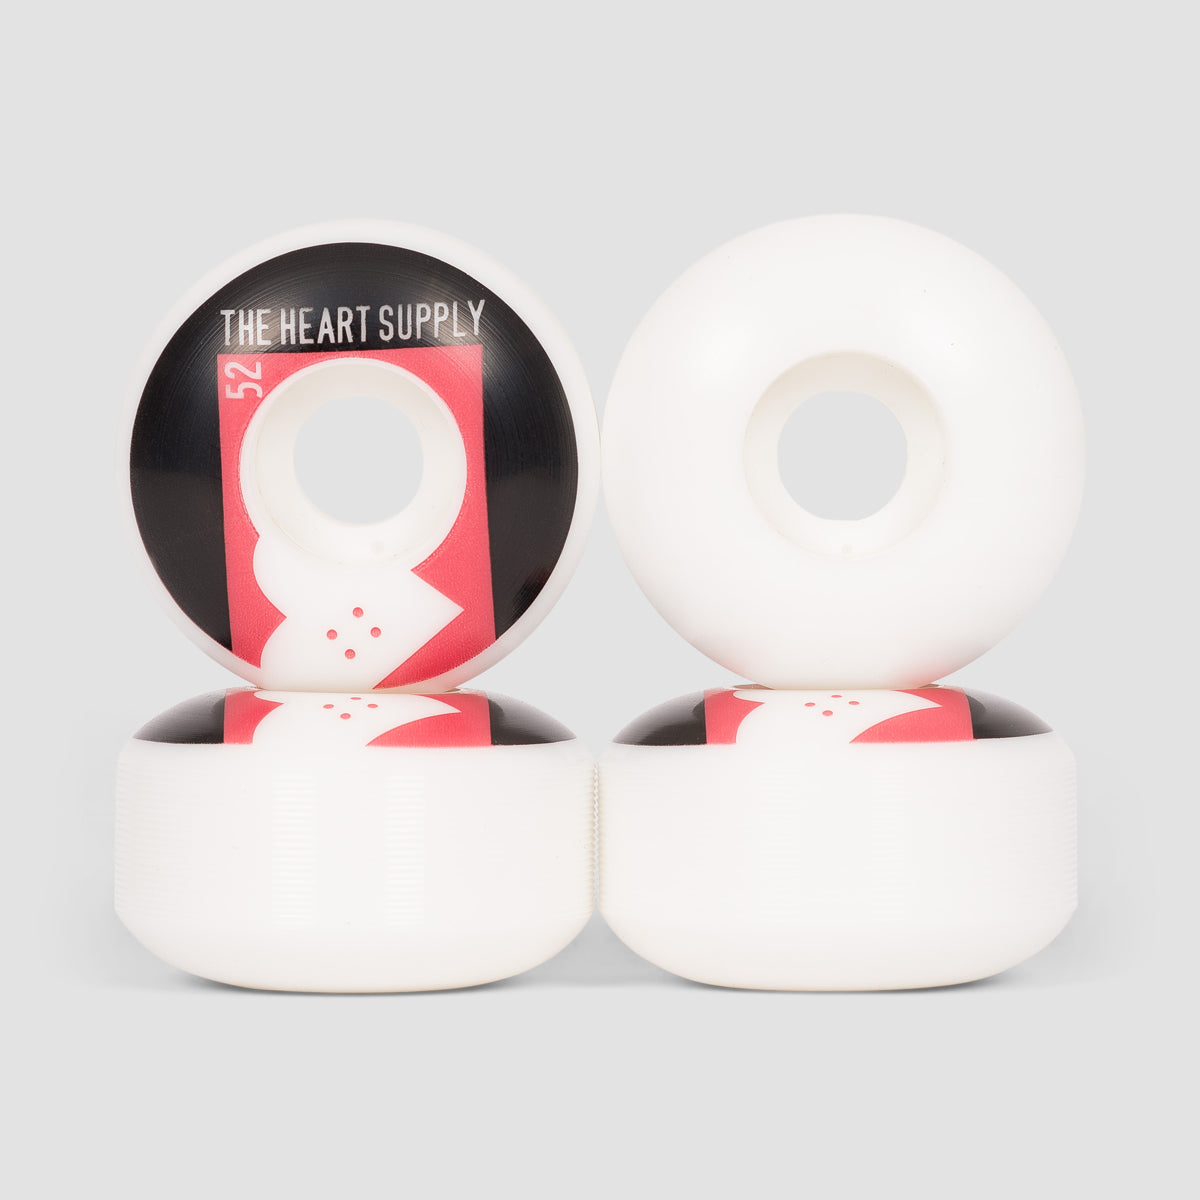 The Heart Supply Even Skateboard Wheels Red 52mm